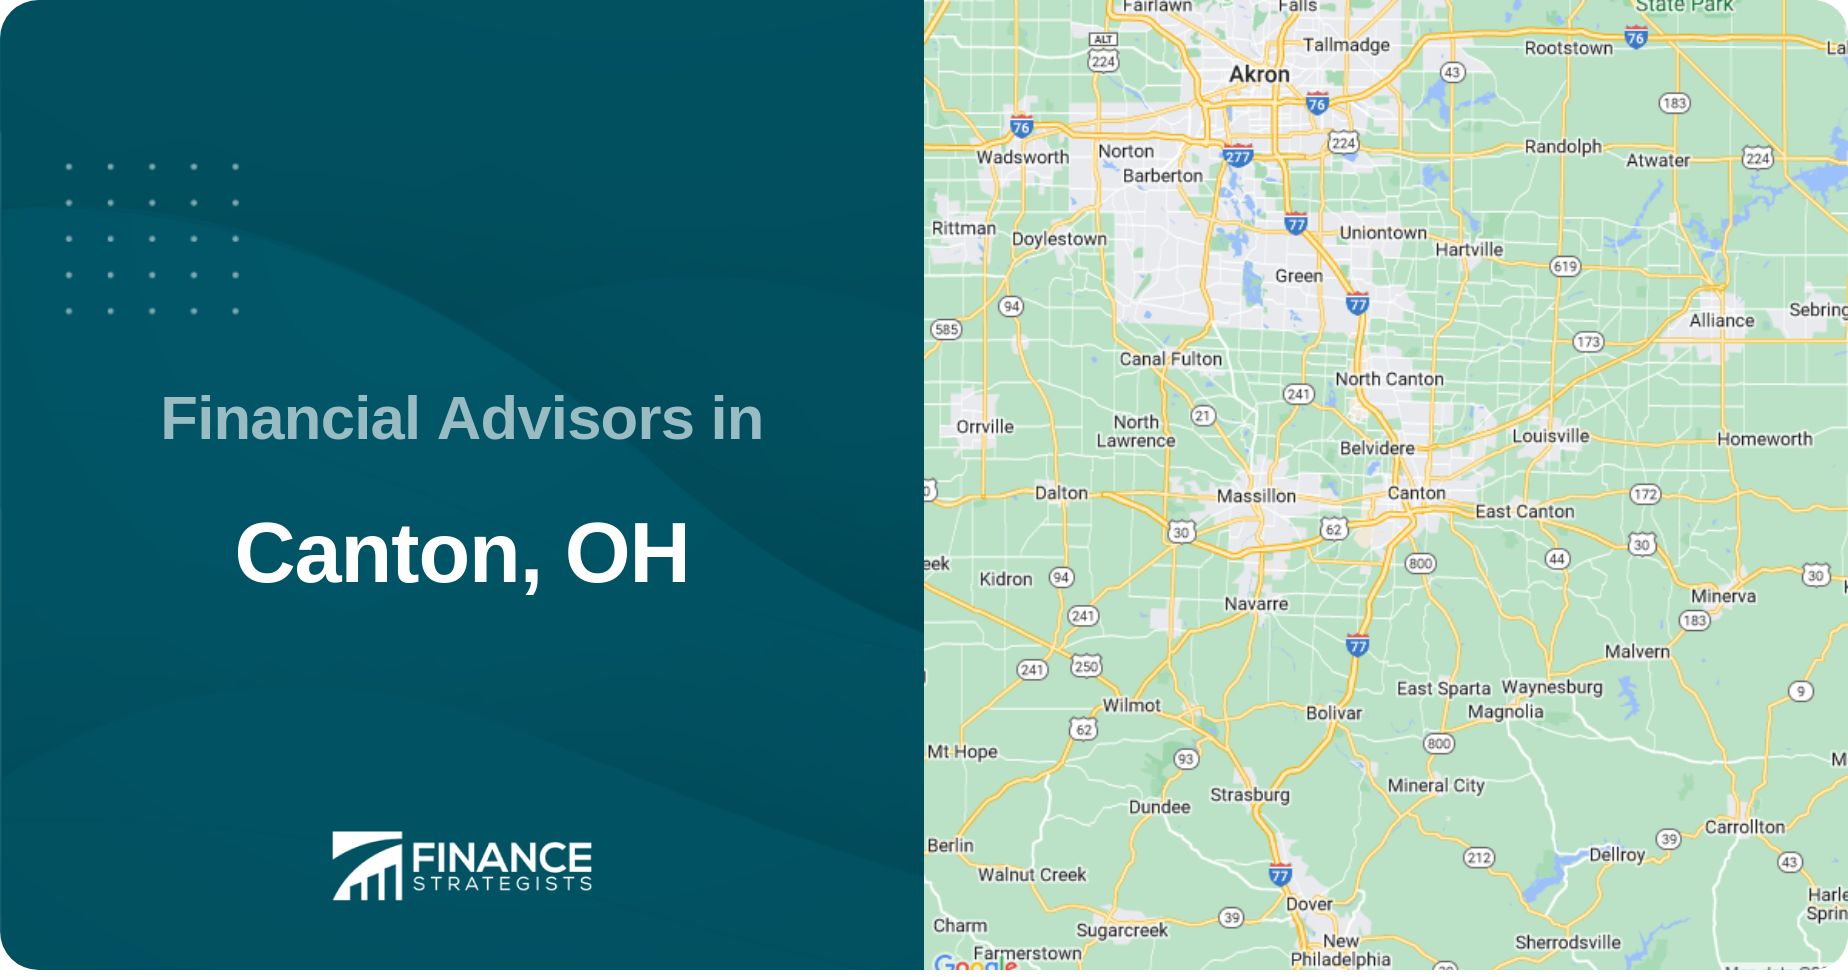 Financial Advisors in Canton, OH